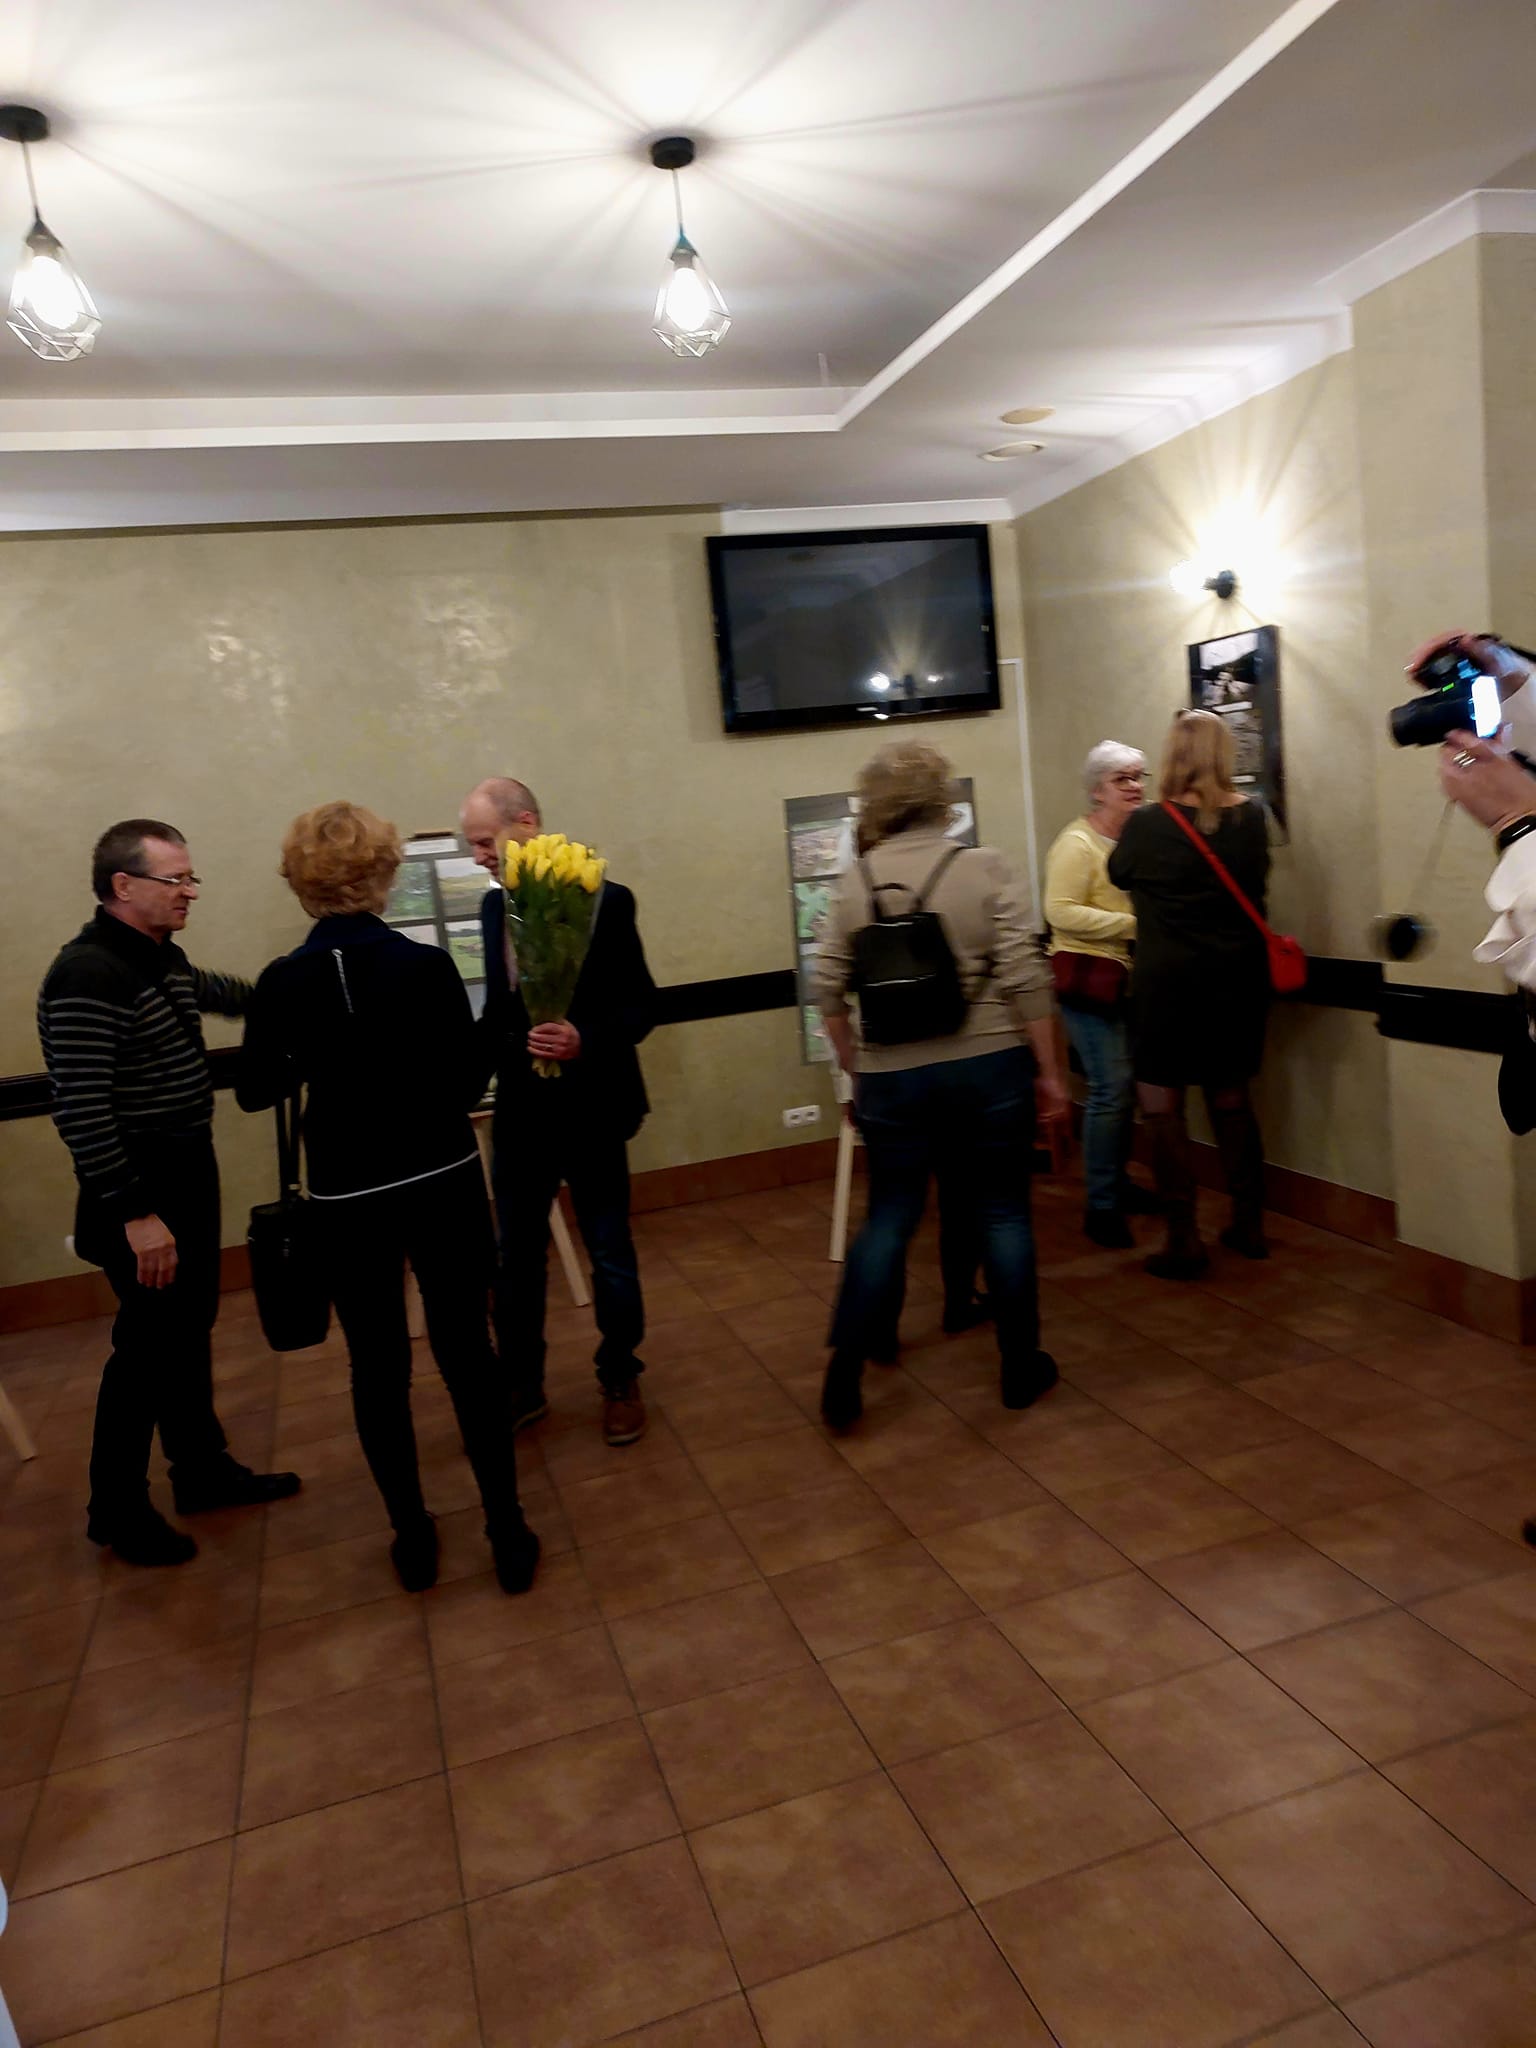 Visitors watch the photo exhibition with interest.